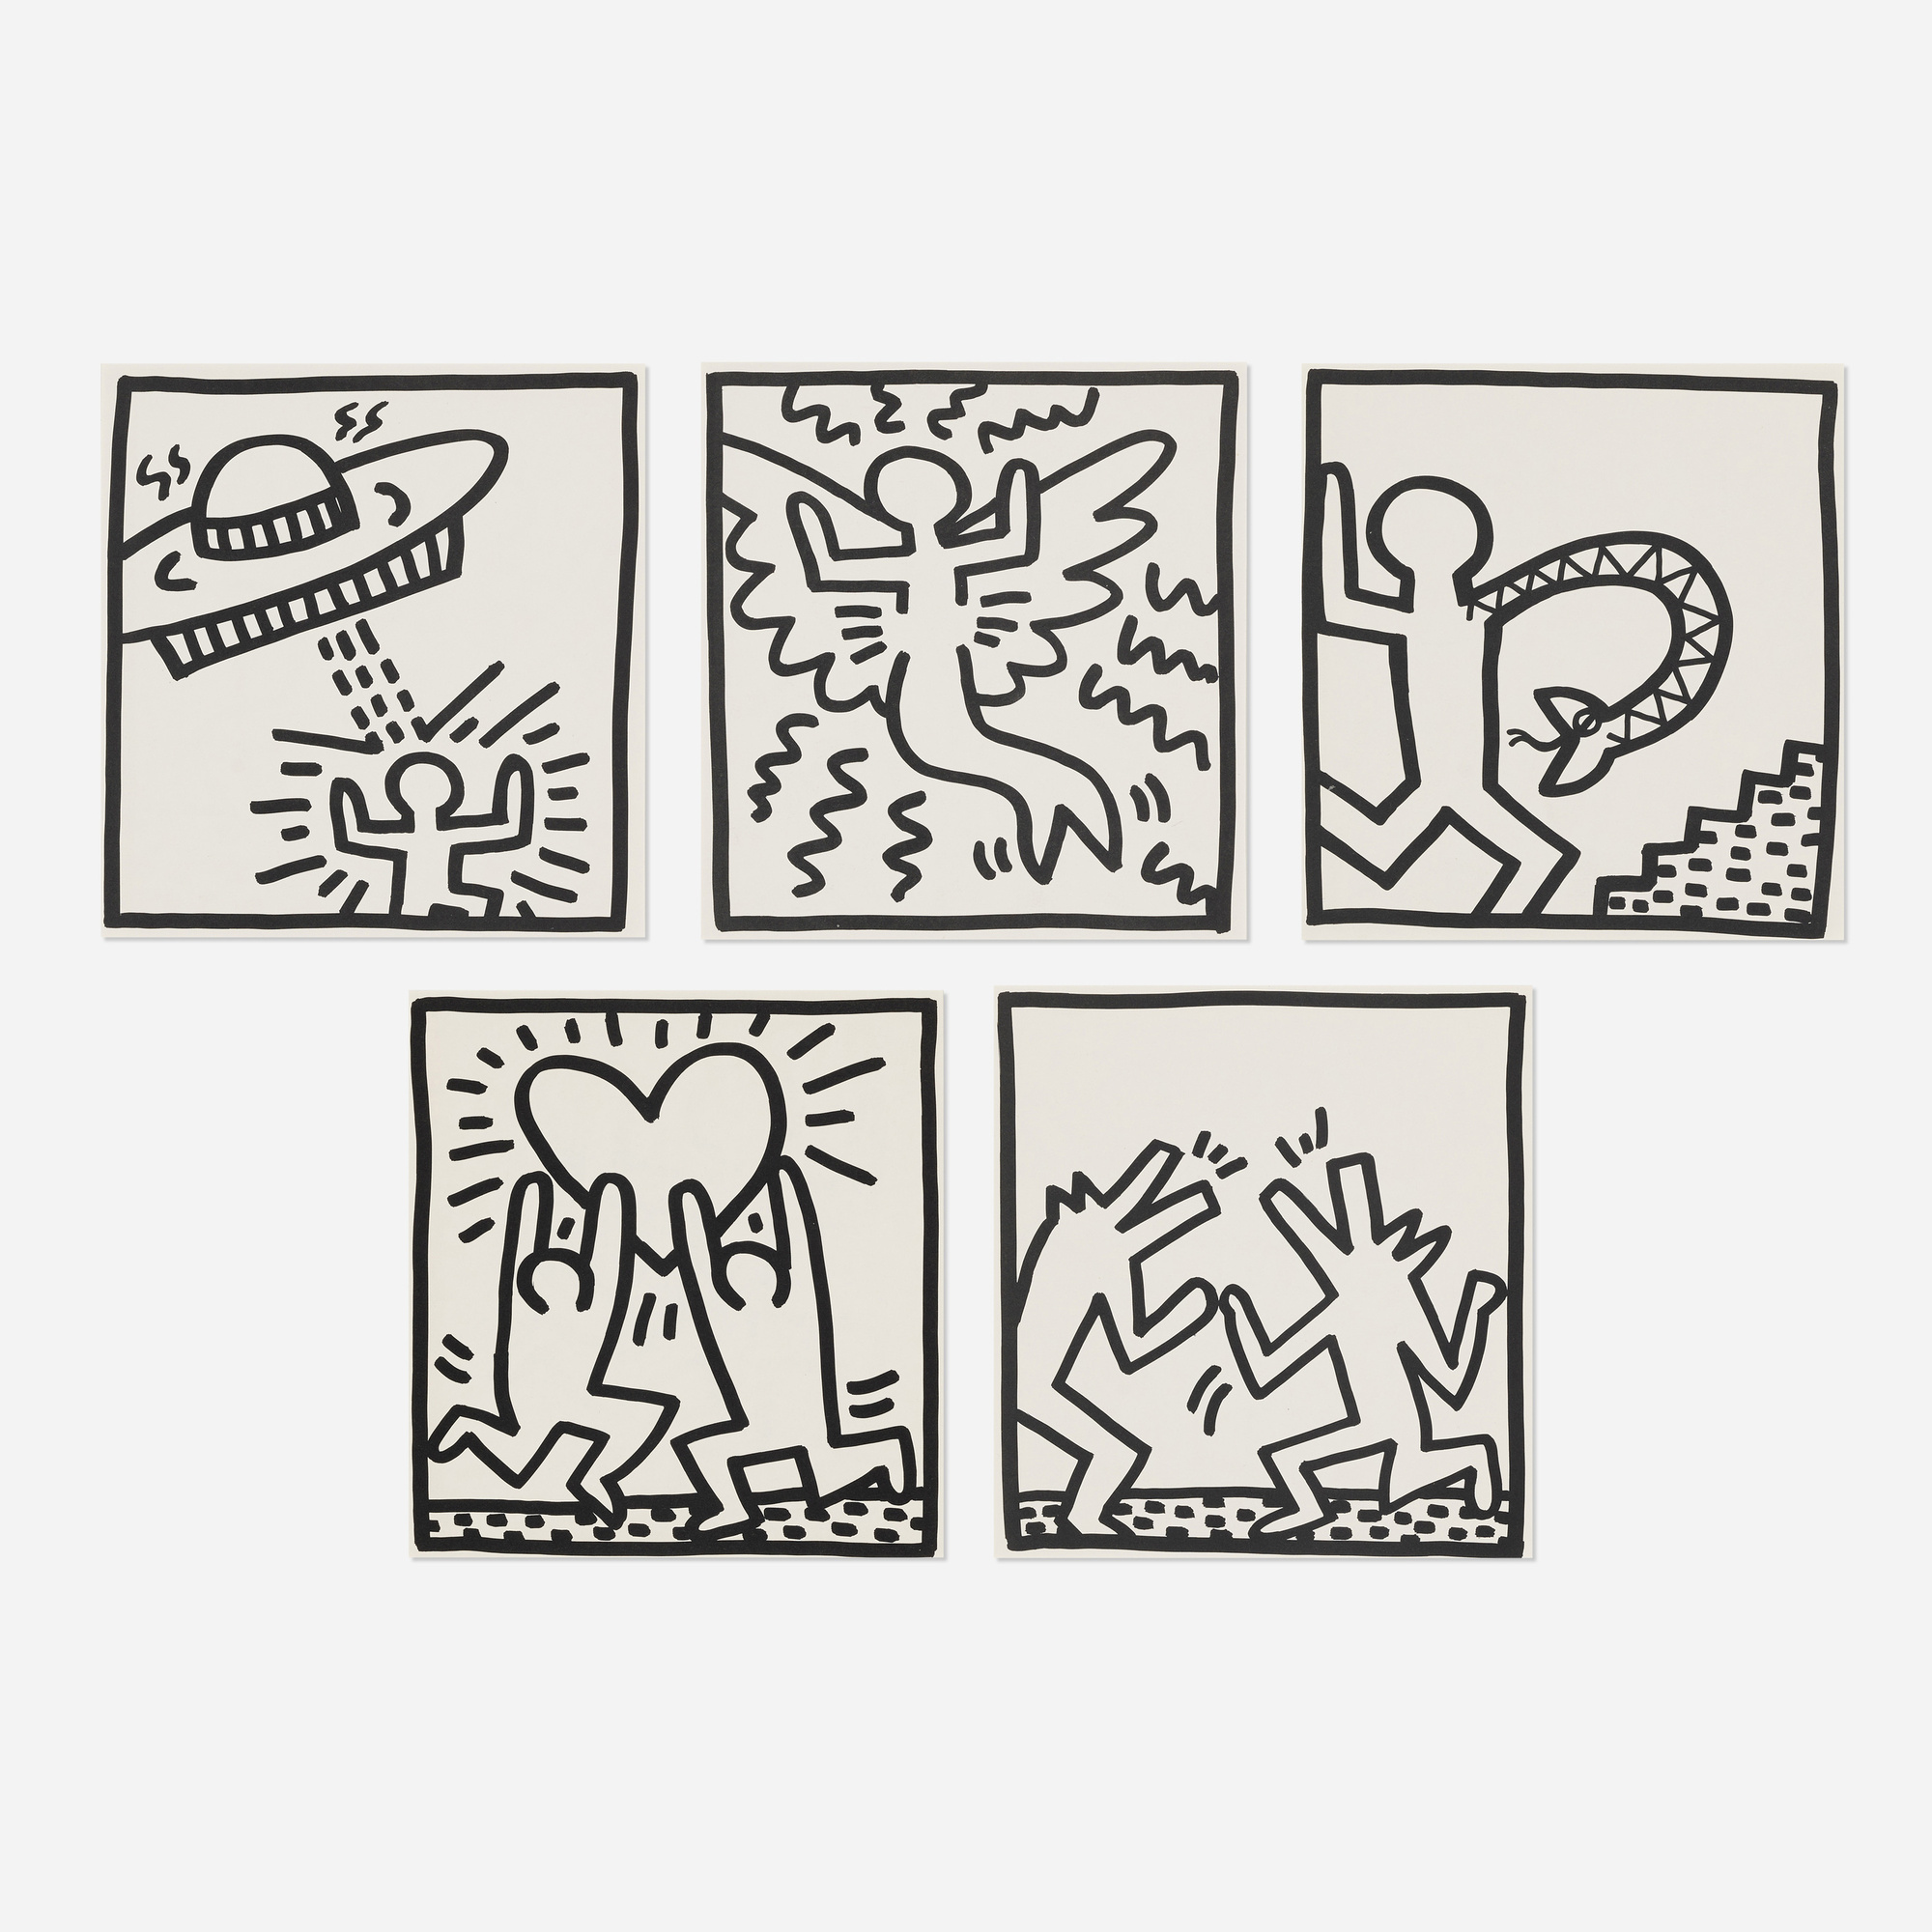 326: KEITH HARING, Untitled (five works from the Keith Haring 